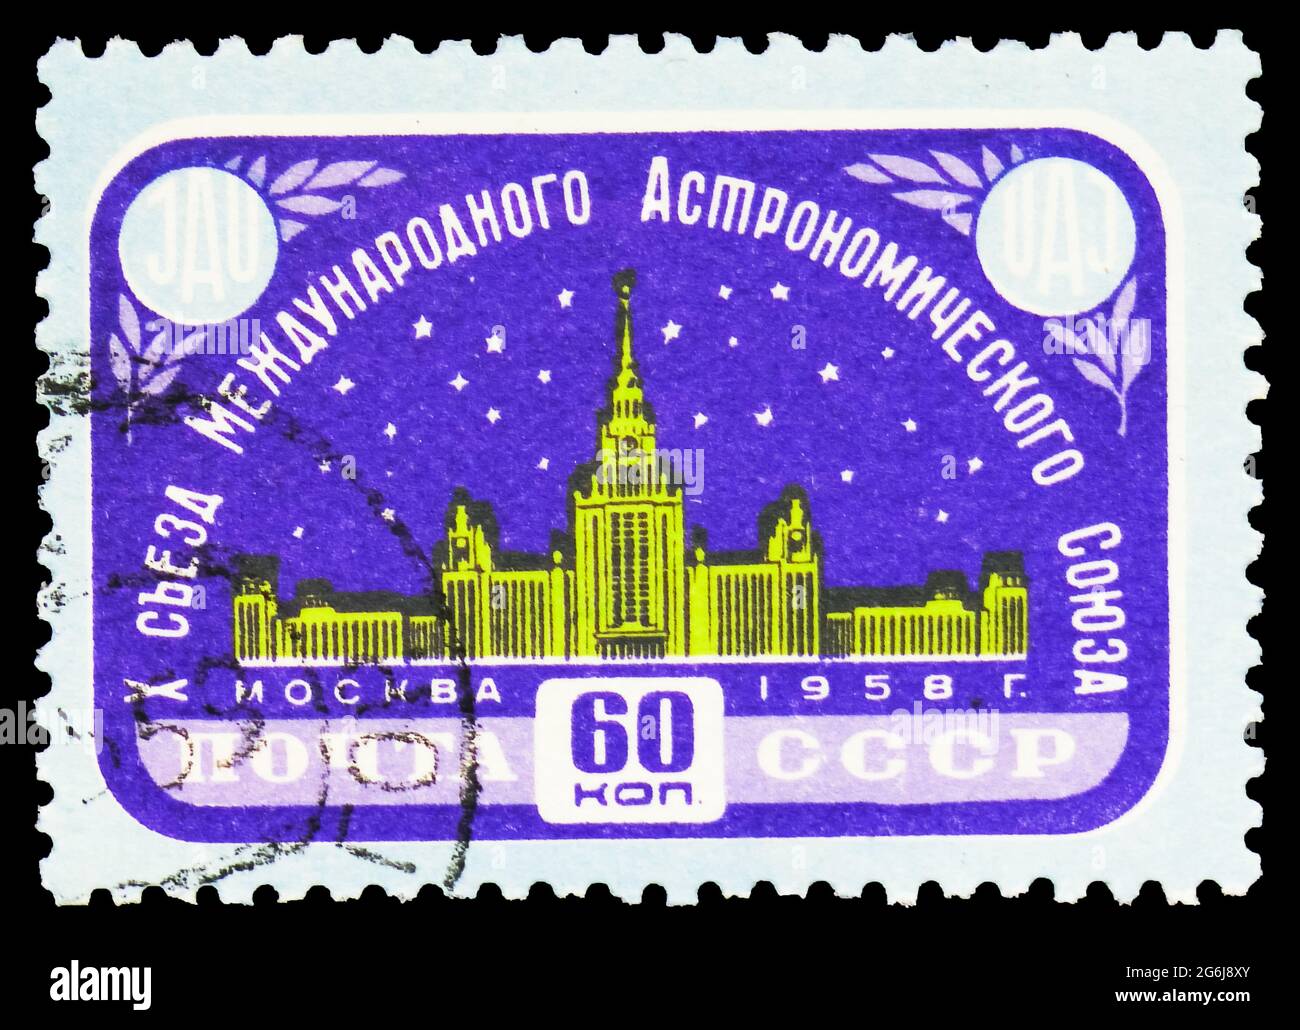 MOSCOW, RUSSIA - MARCH 21, 2020: Postage stamp printed in Soviet Union shows Moscow University, serie, circa 1958 Stock Photo